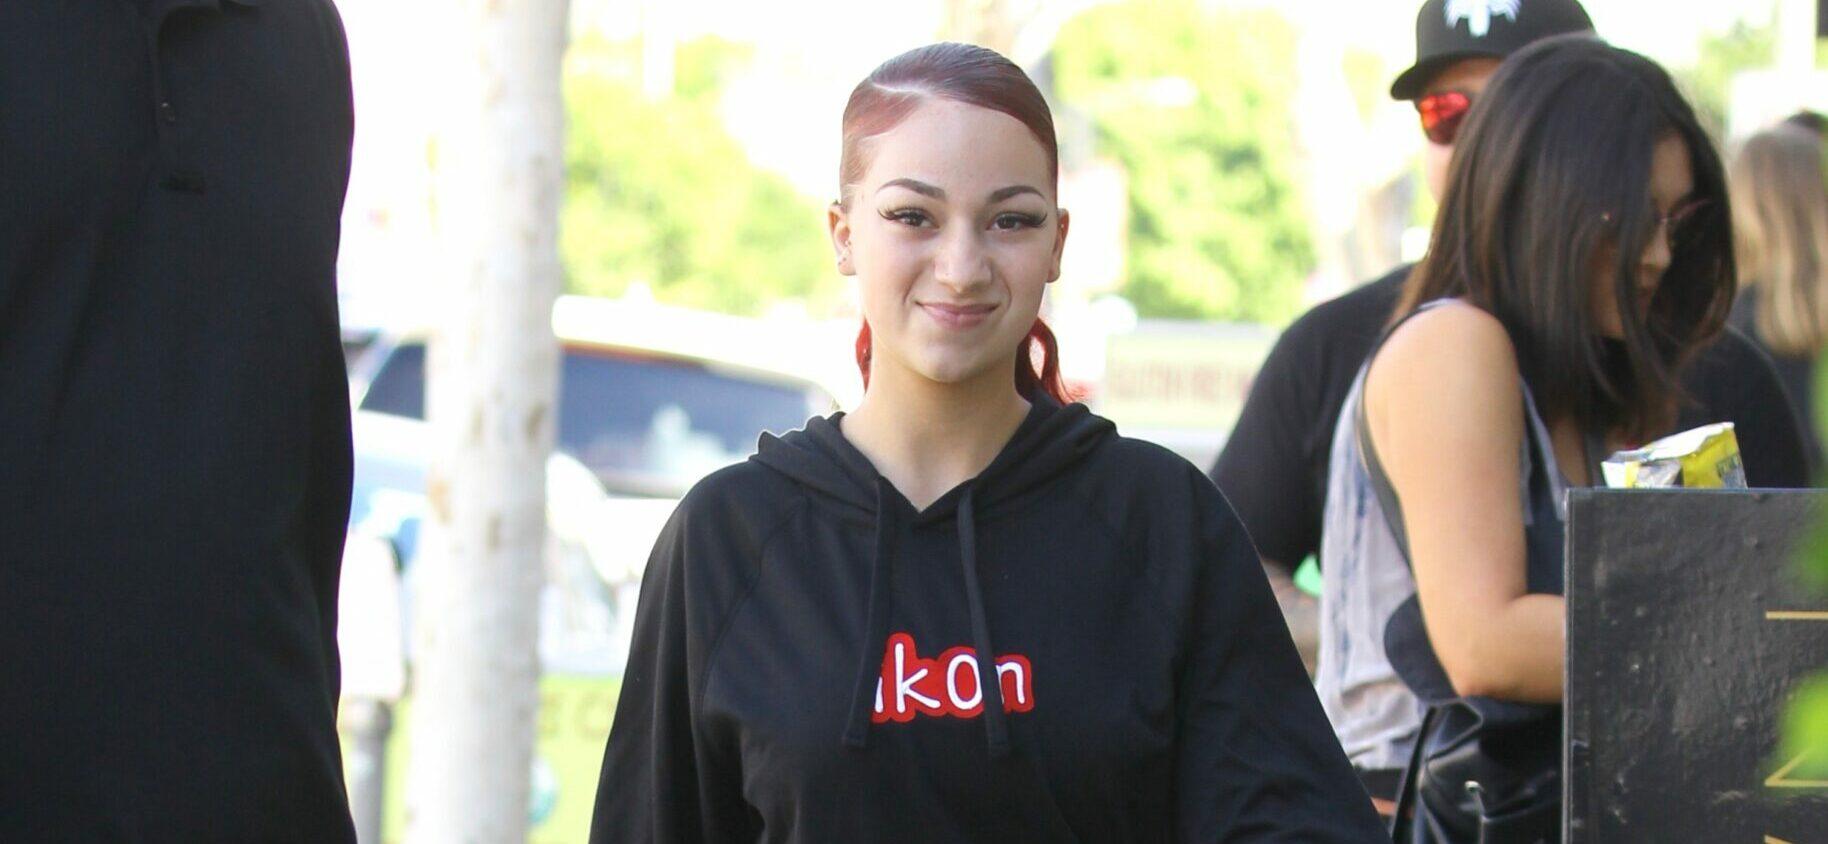 Bhad Bhabie Says Haters Didn’t ‘Pass The Test’ After Debuting New Look